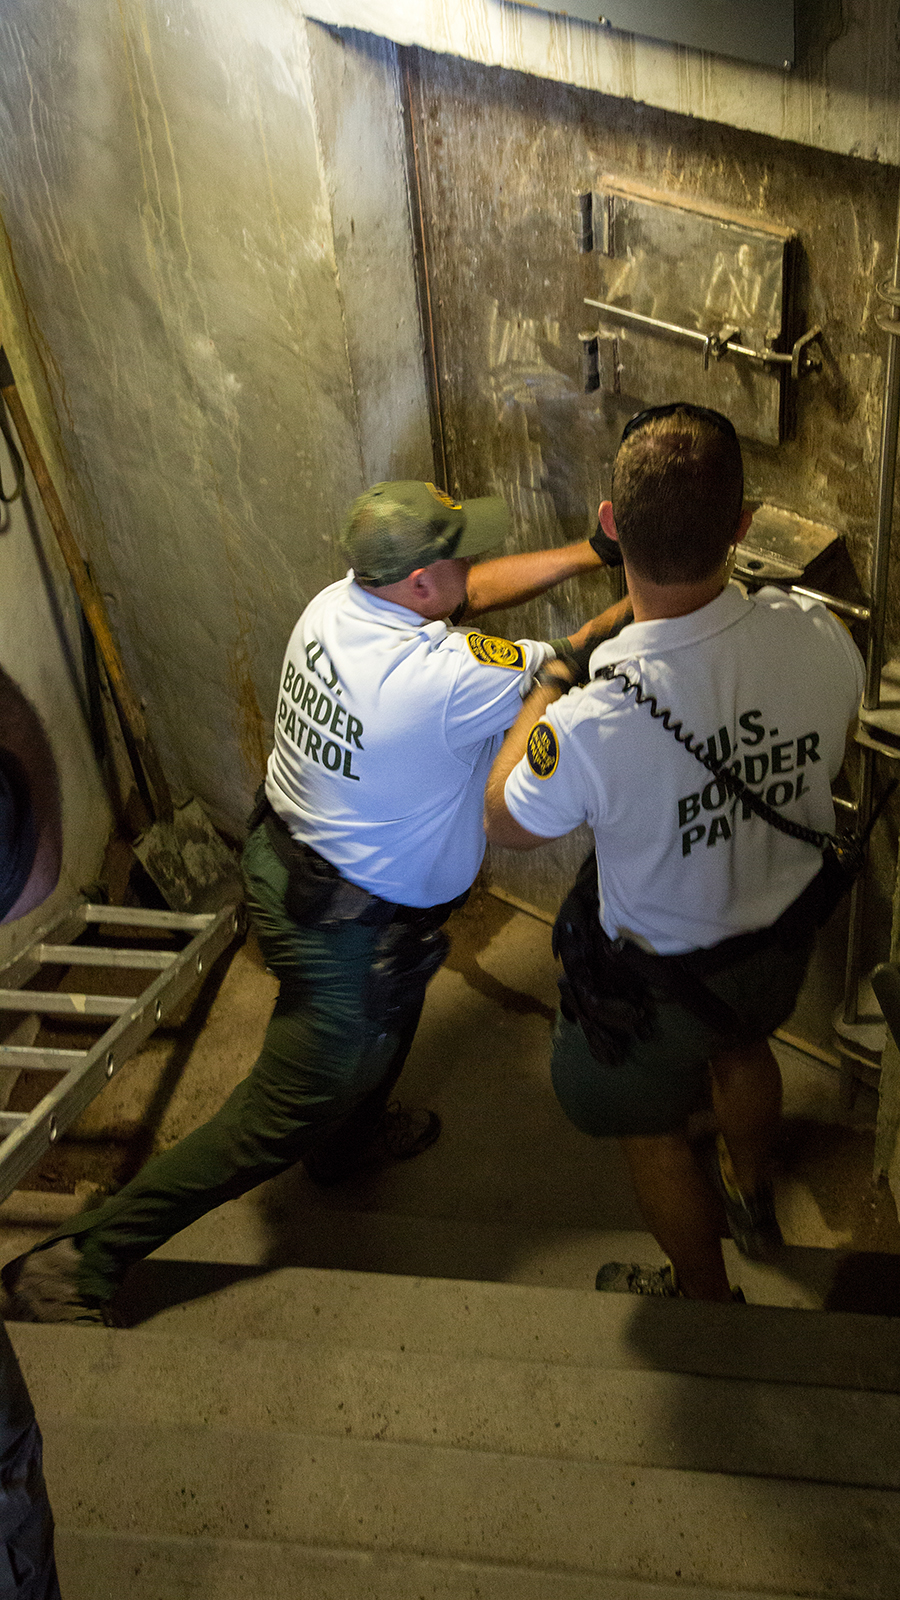 Border Patrol agents open an entrance to an area in the drainage system.